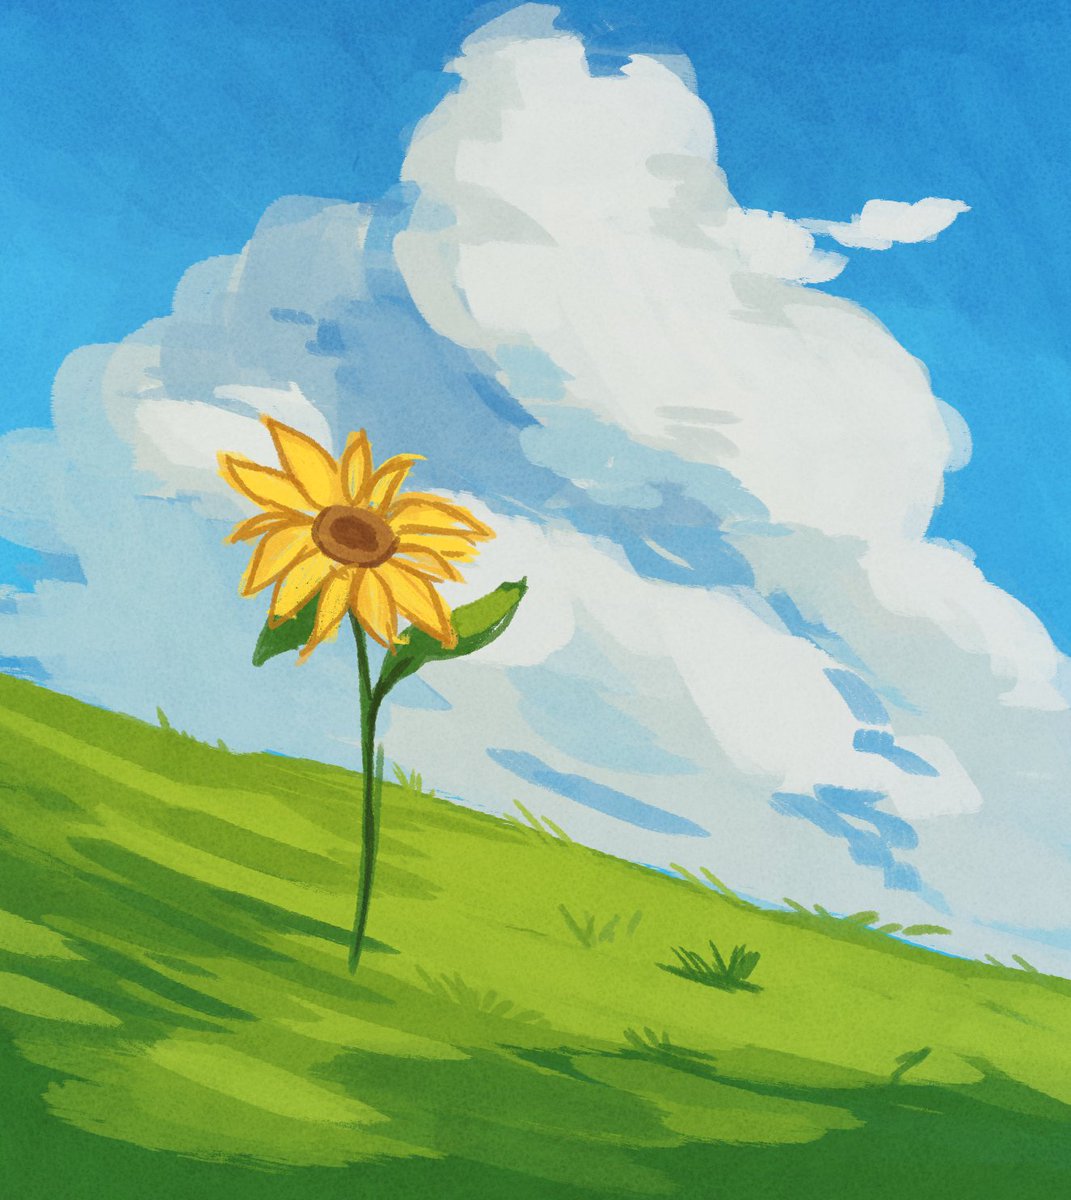 Just a little sunflower I made too test something 🌻 Inspired by a ghibli screenshot I found online because I had 0 ideas